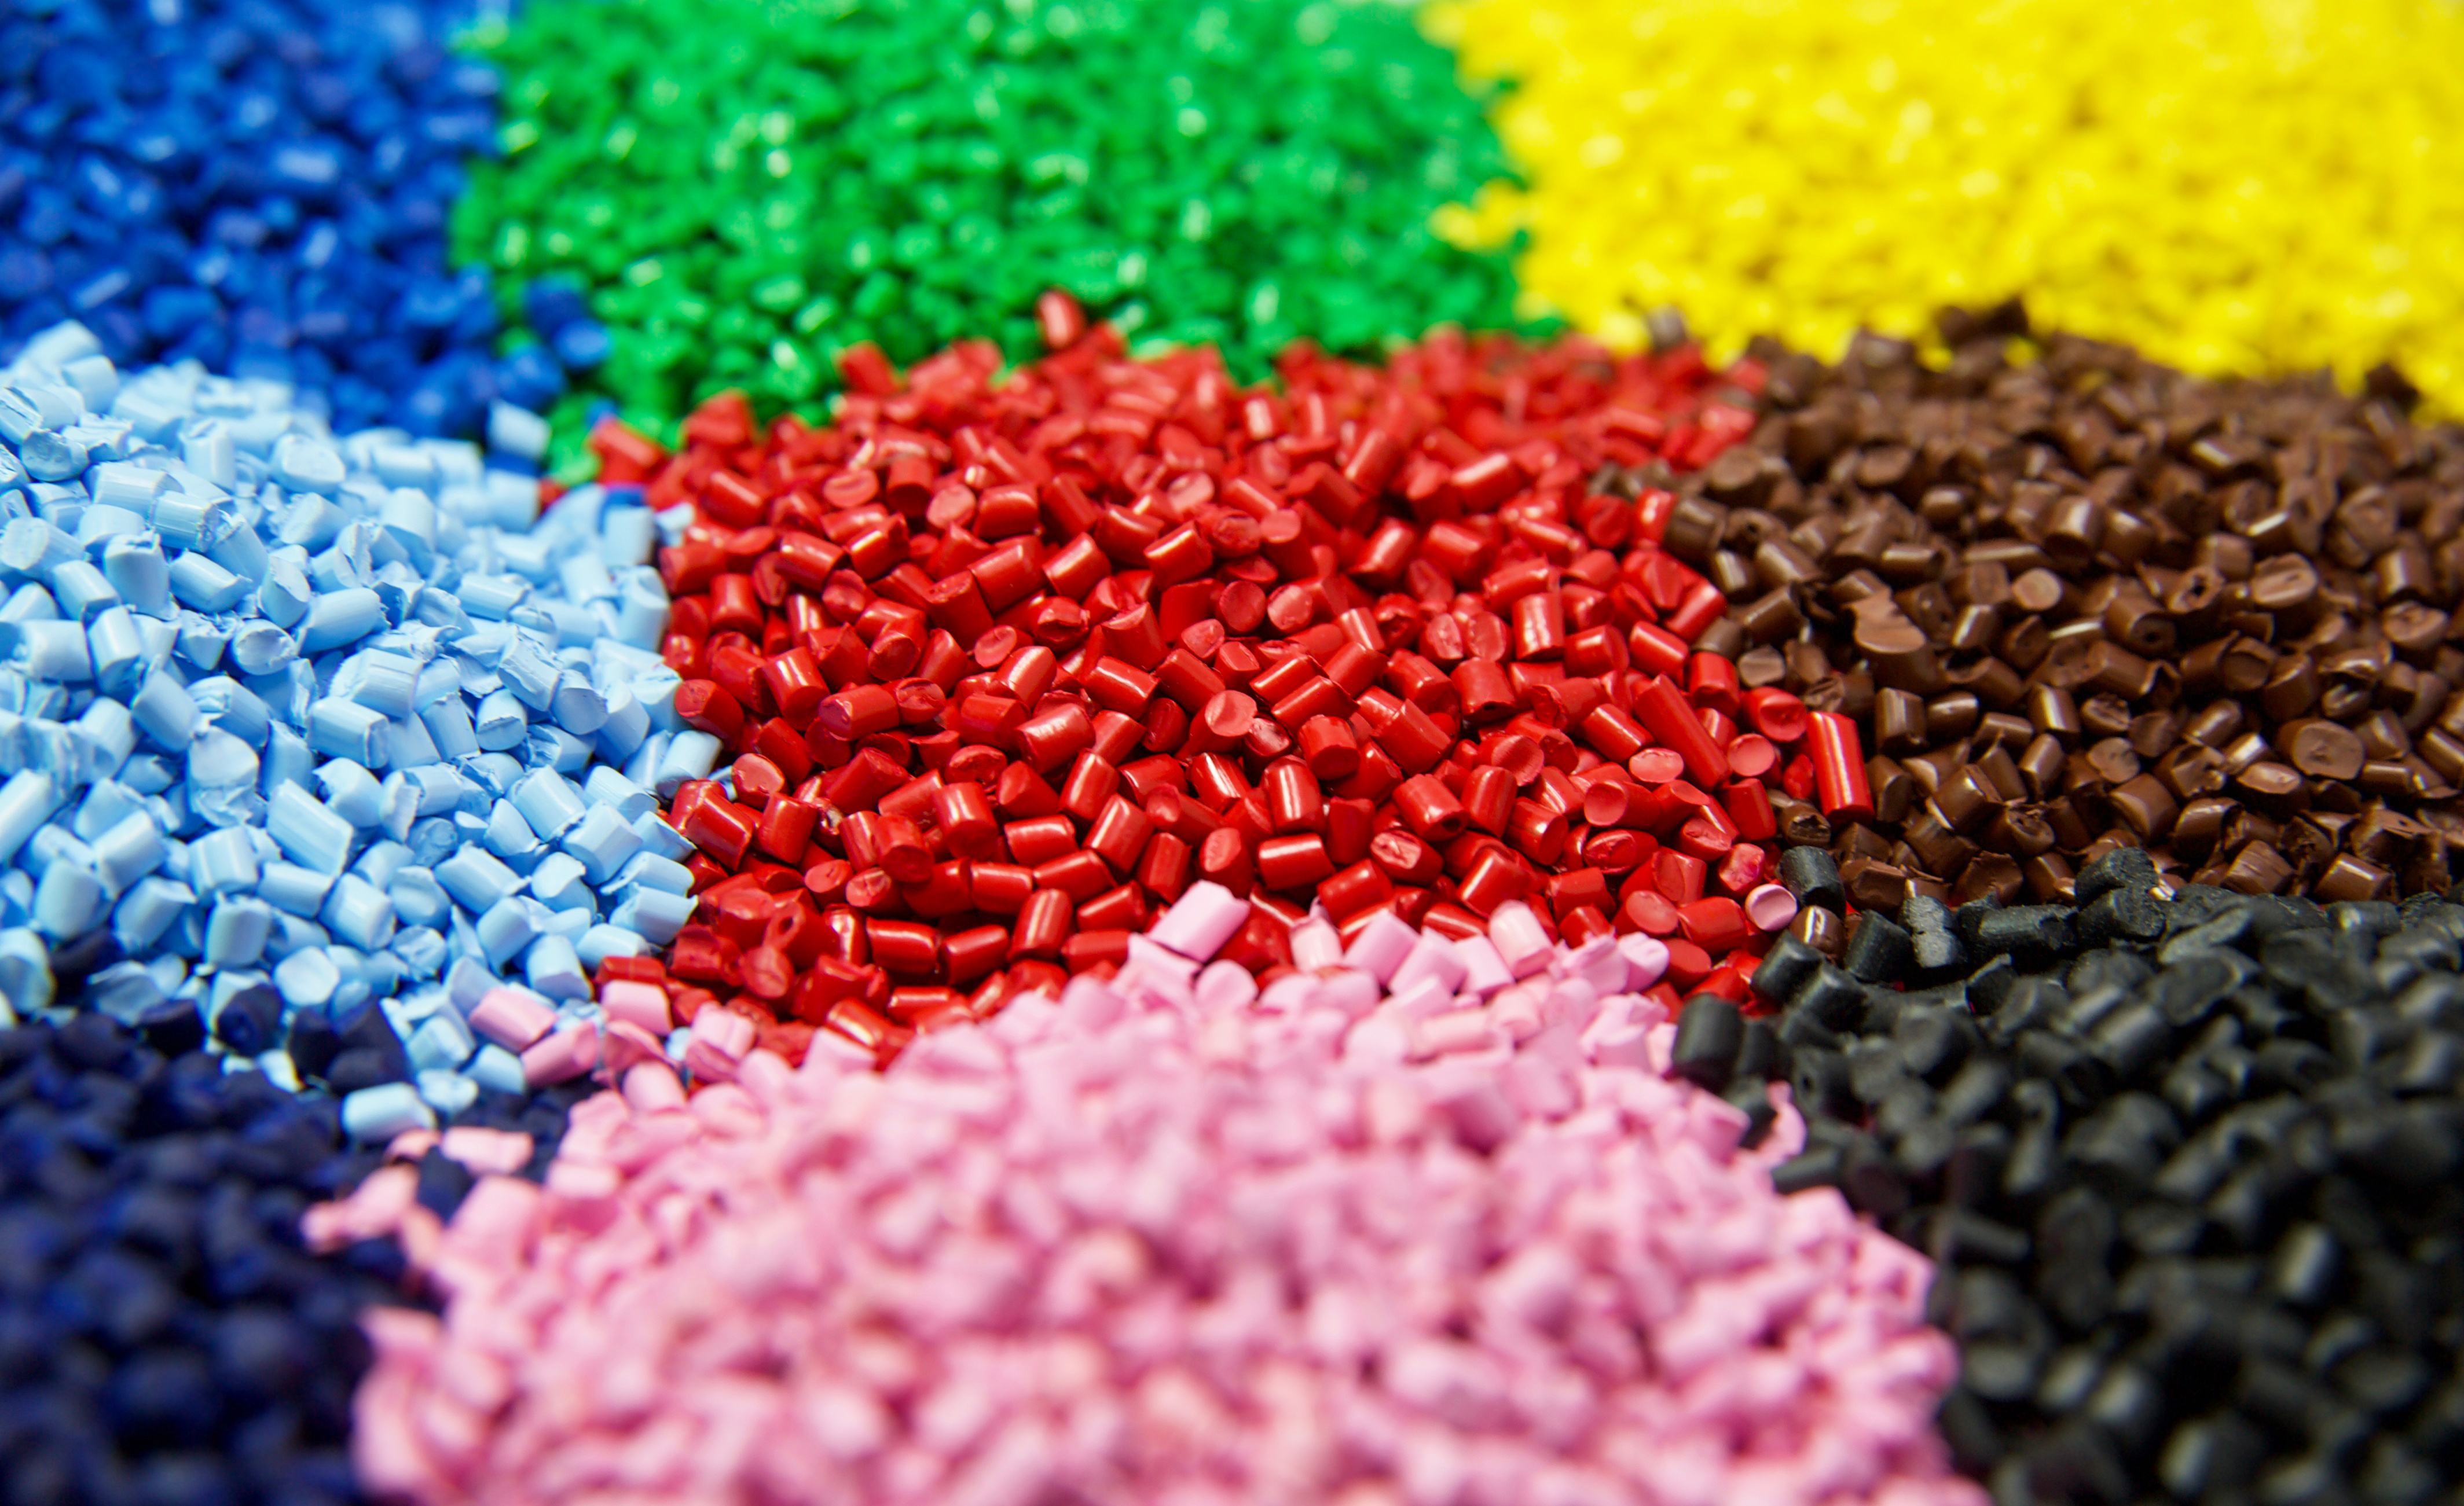 Multicolored thermoplastic polymers.